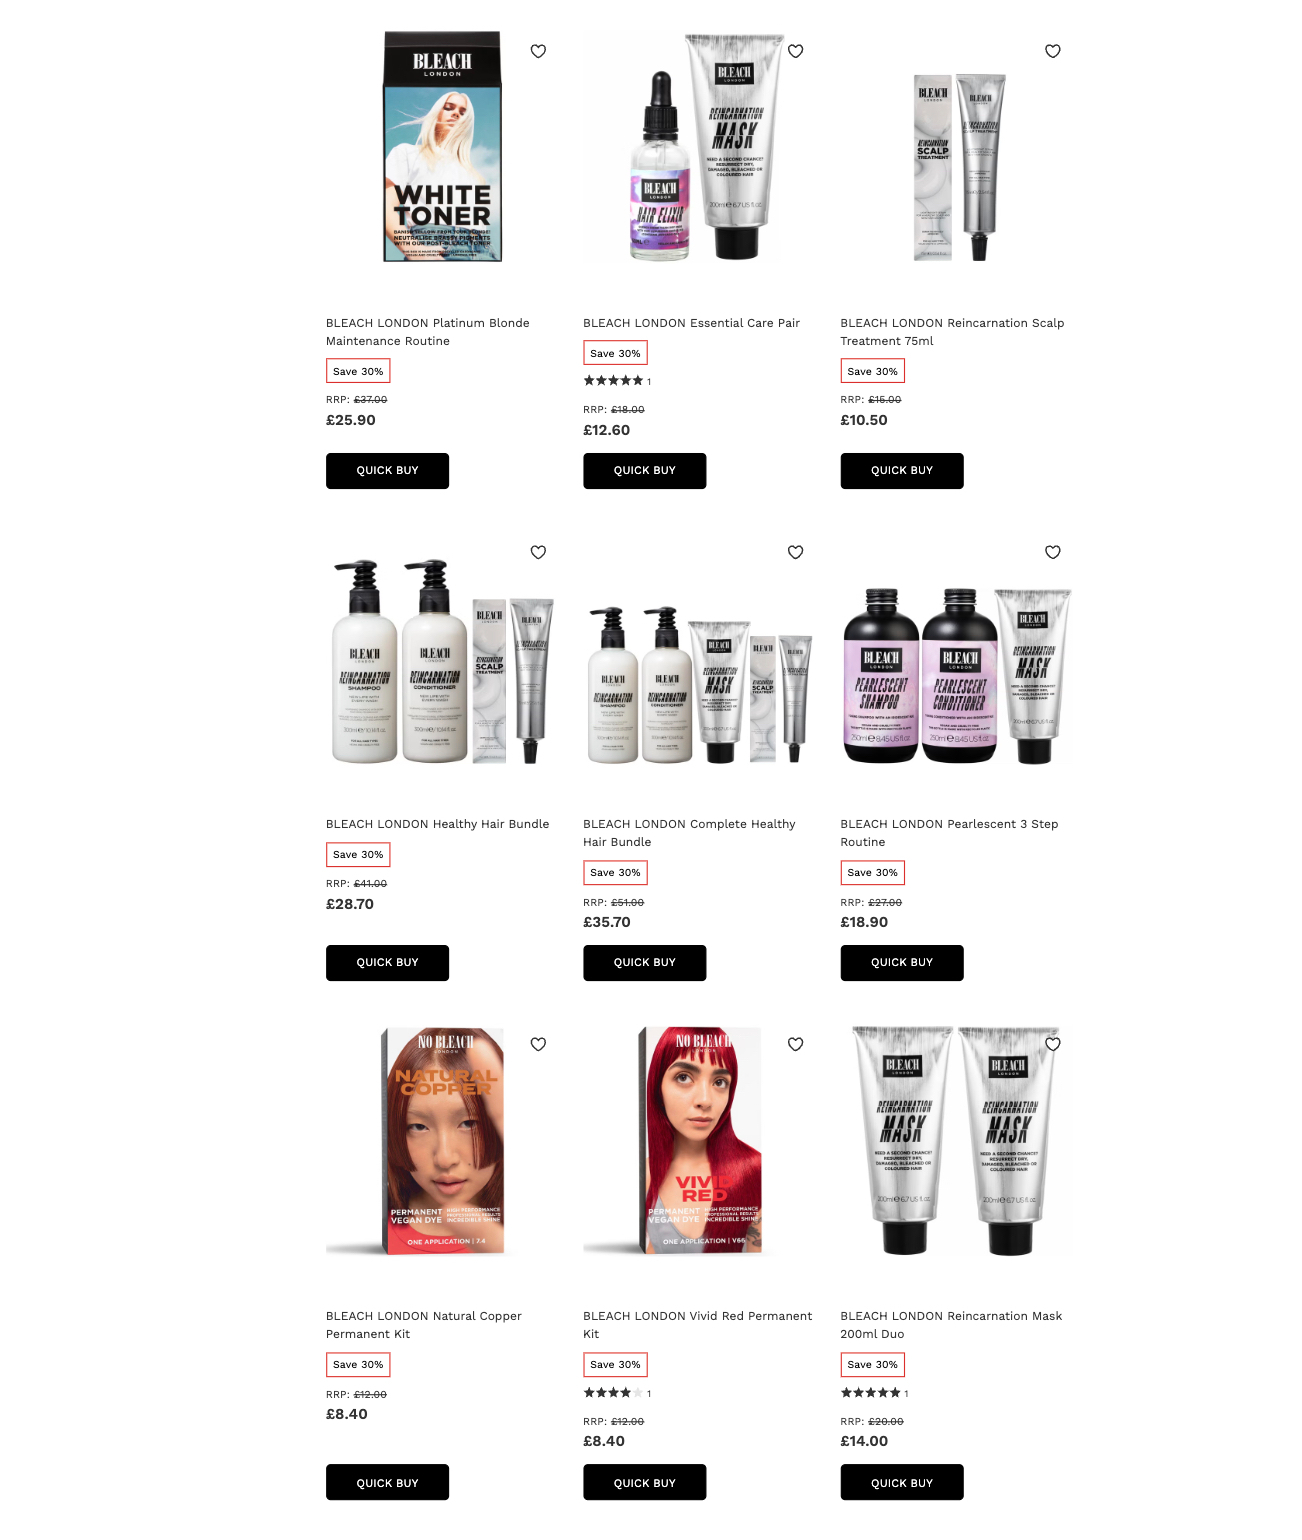 Up to 35% off Bleach London at Lookfantastic